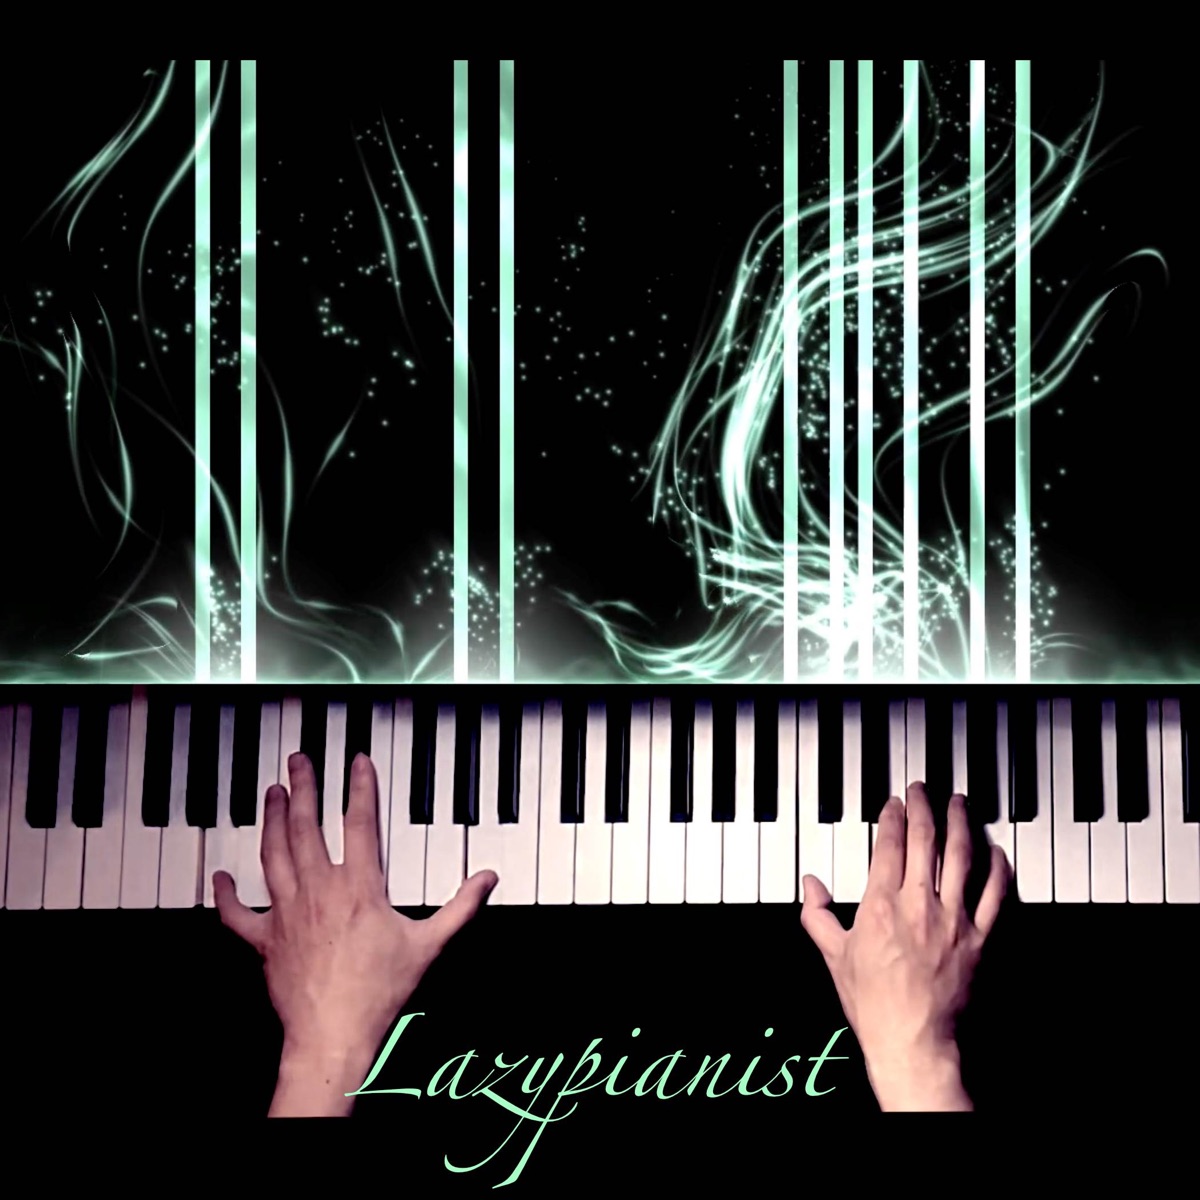 Interstellar Main Theme (Piano Cover) - Single by Lazypianist on Apple Music